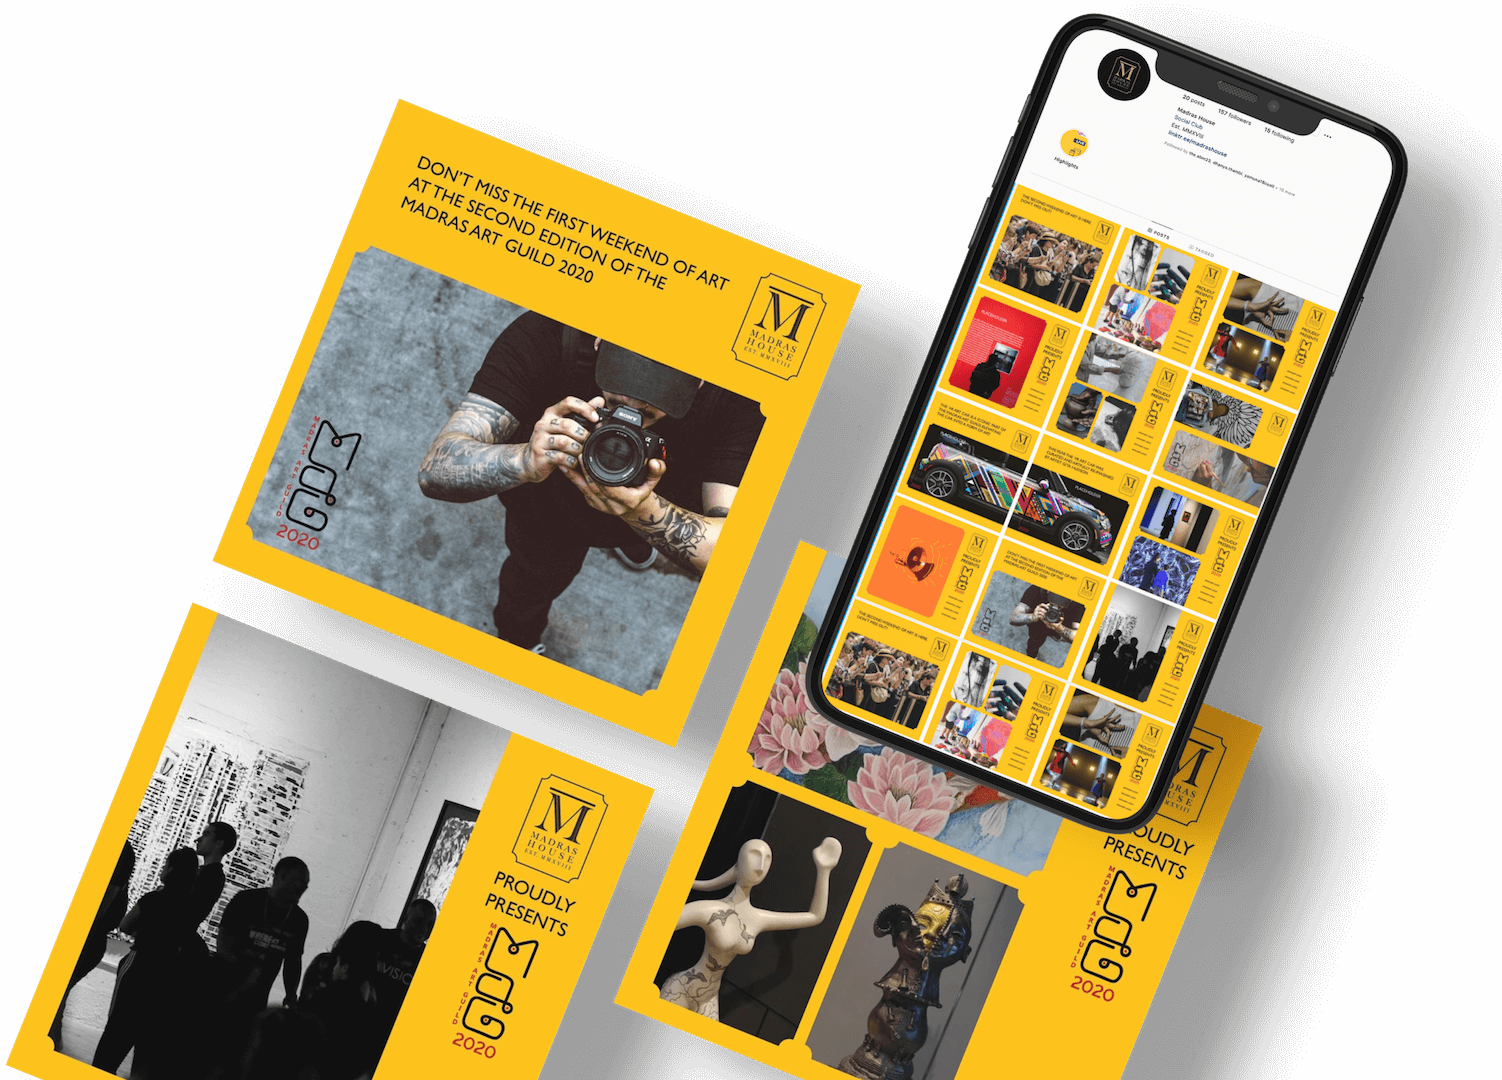 Mockup on Instagram posts made for Madras House by Design Foundry during Madras Art Guild 2020